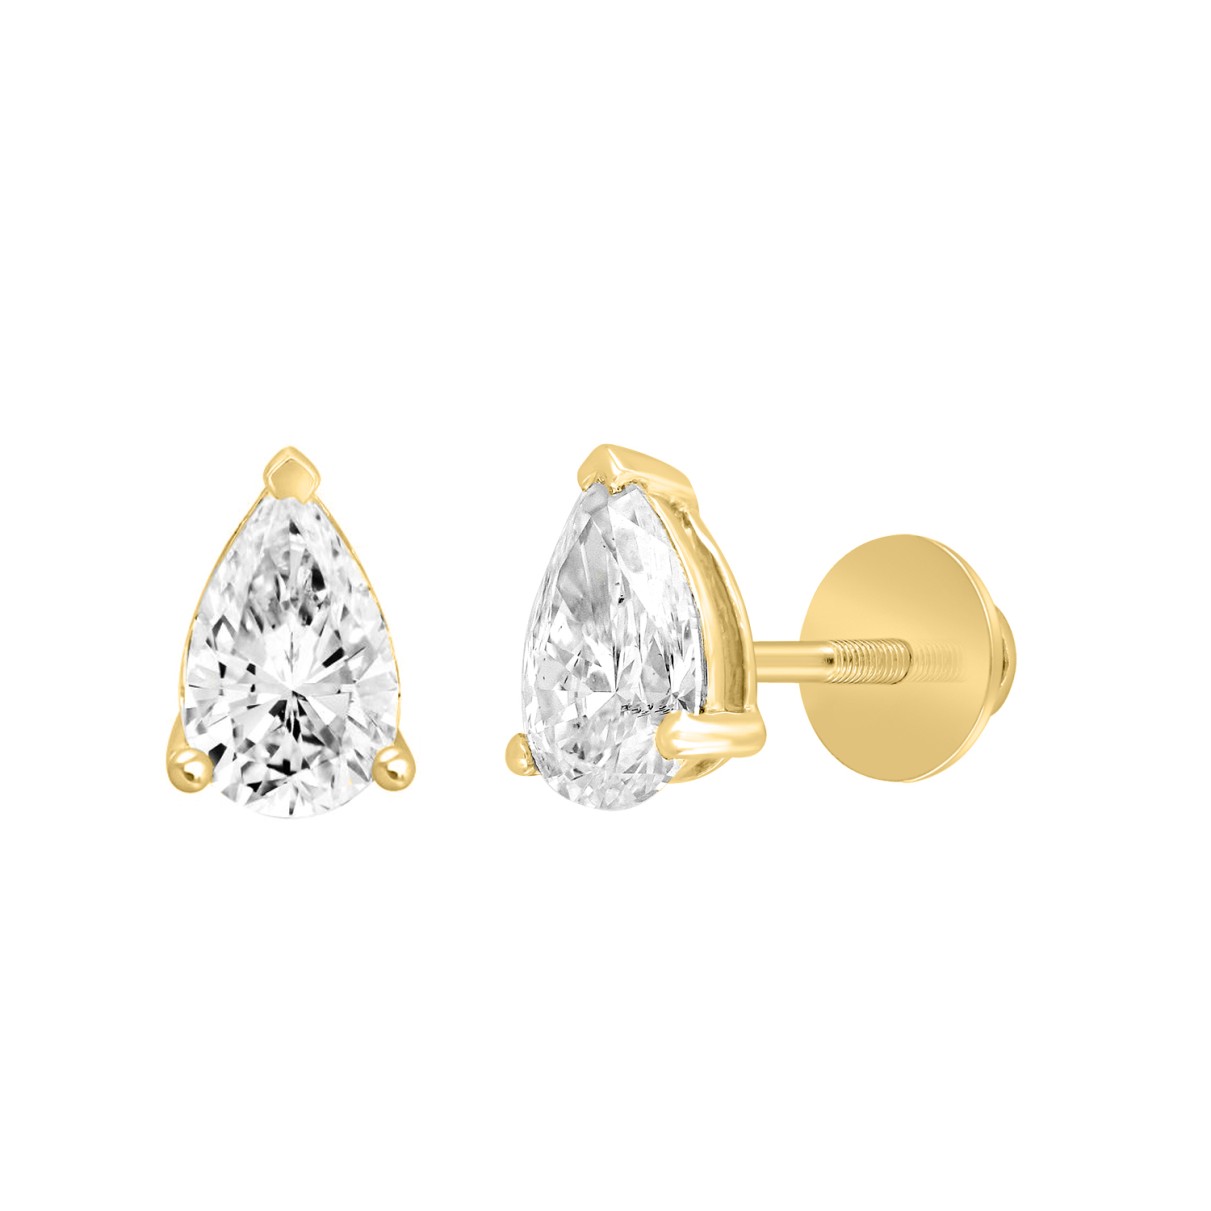 LADIES SOLITAIRE EARRINGS 2CT PEAR DIAMOND 14K YELLOW GOLD